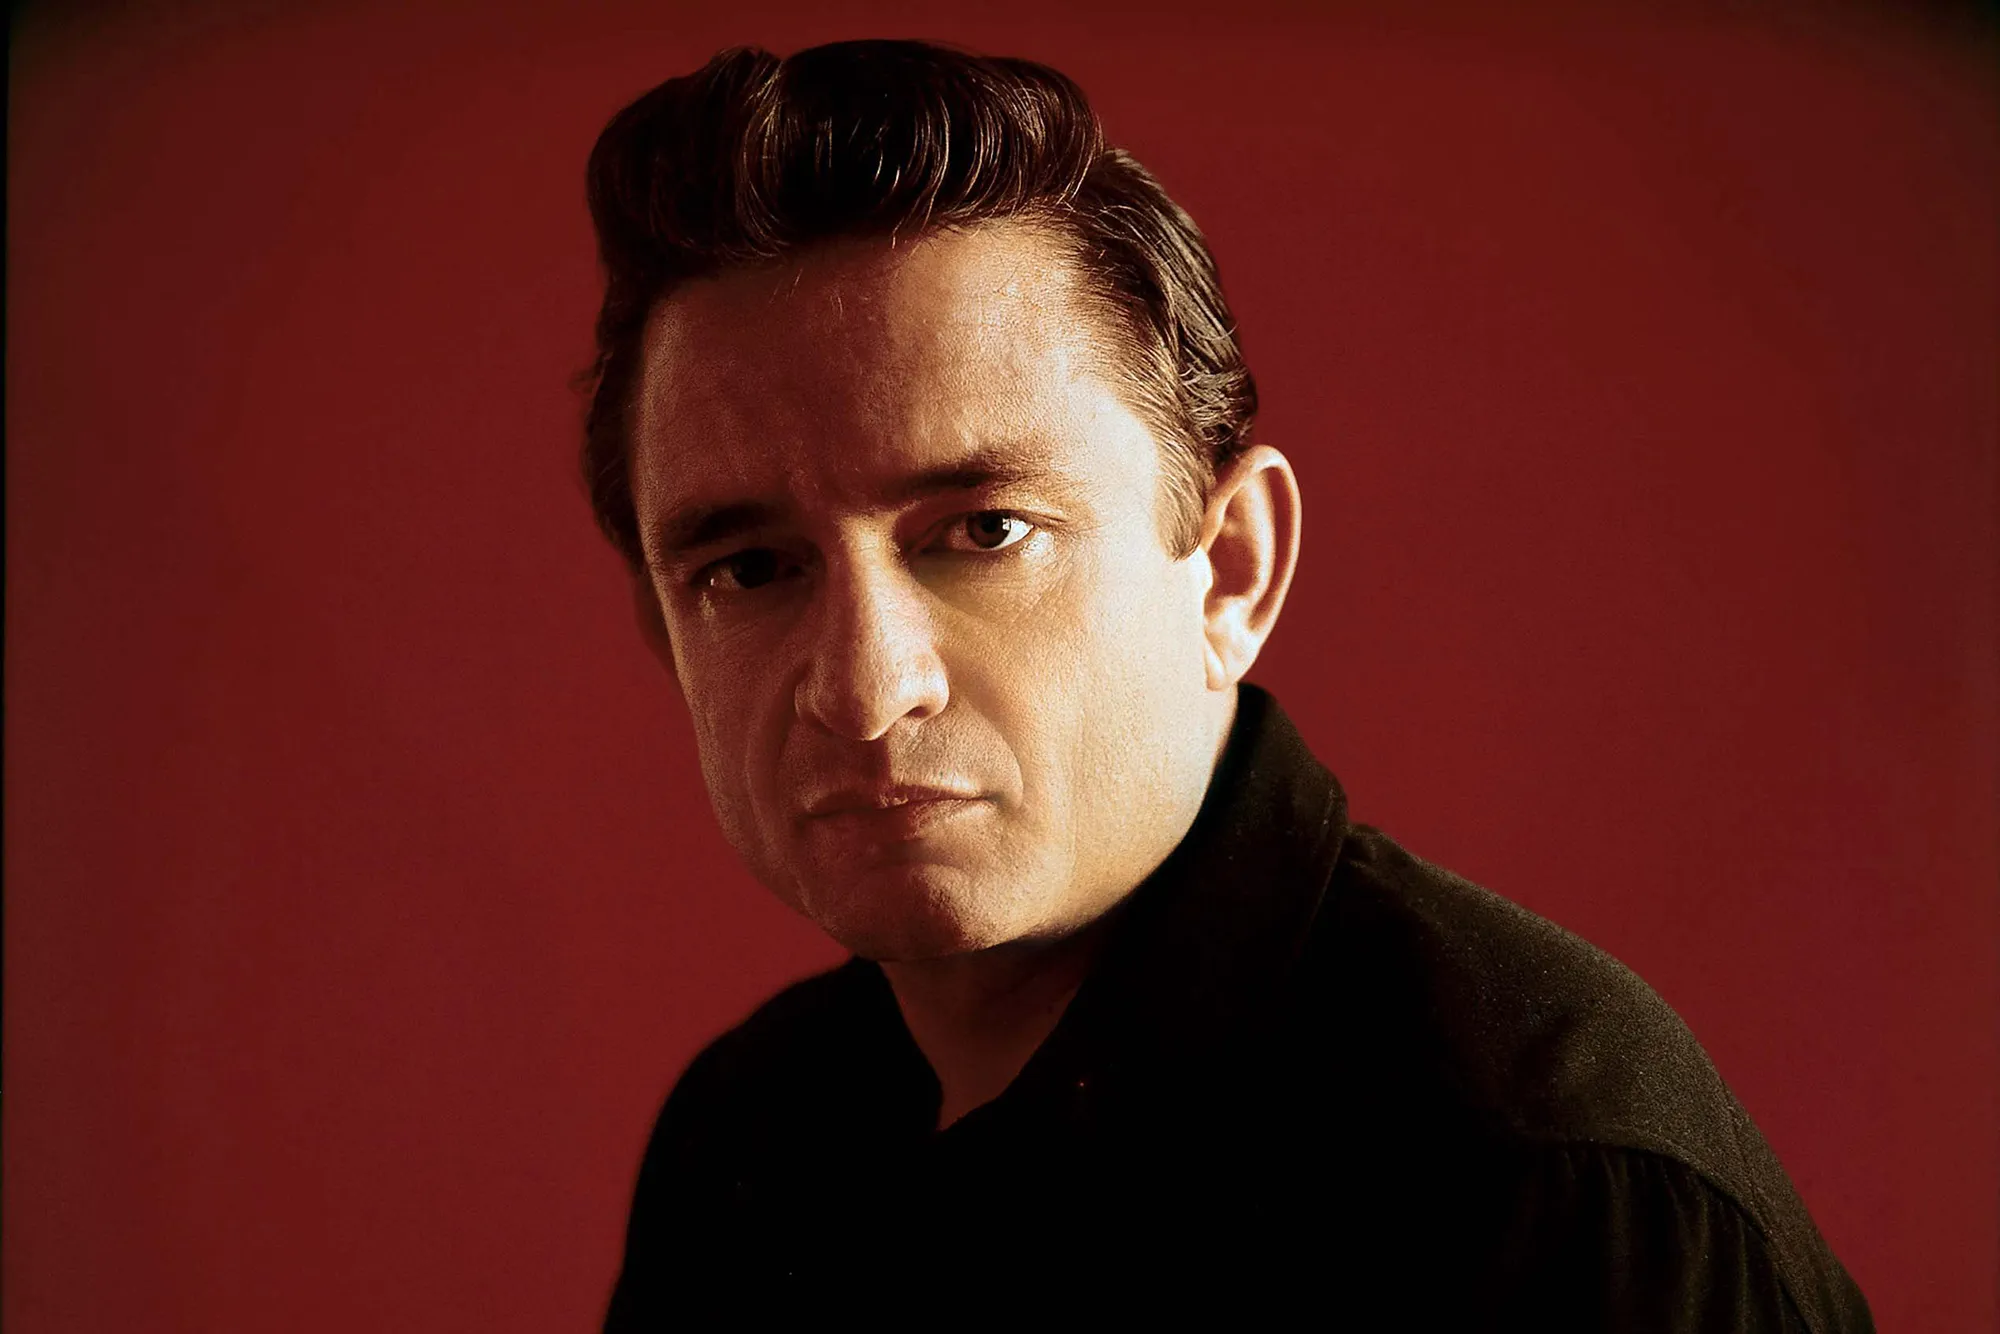 The Gift: The Journey of Johnny Cash (2019, Official Documentary)